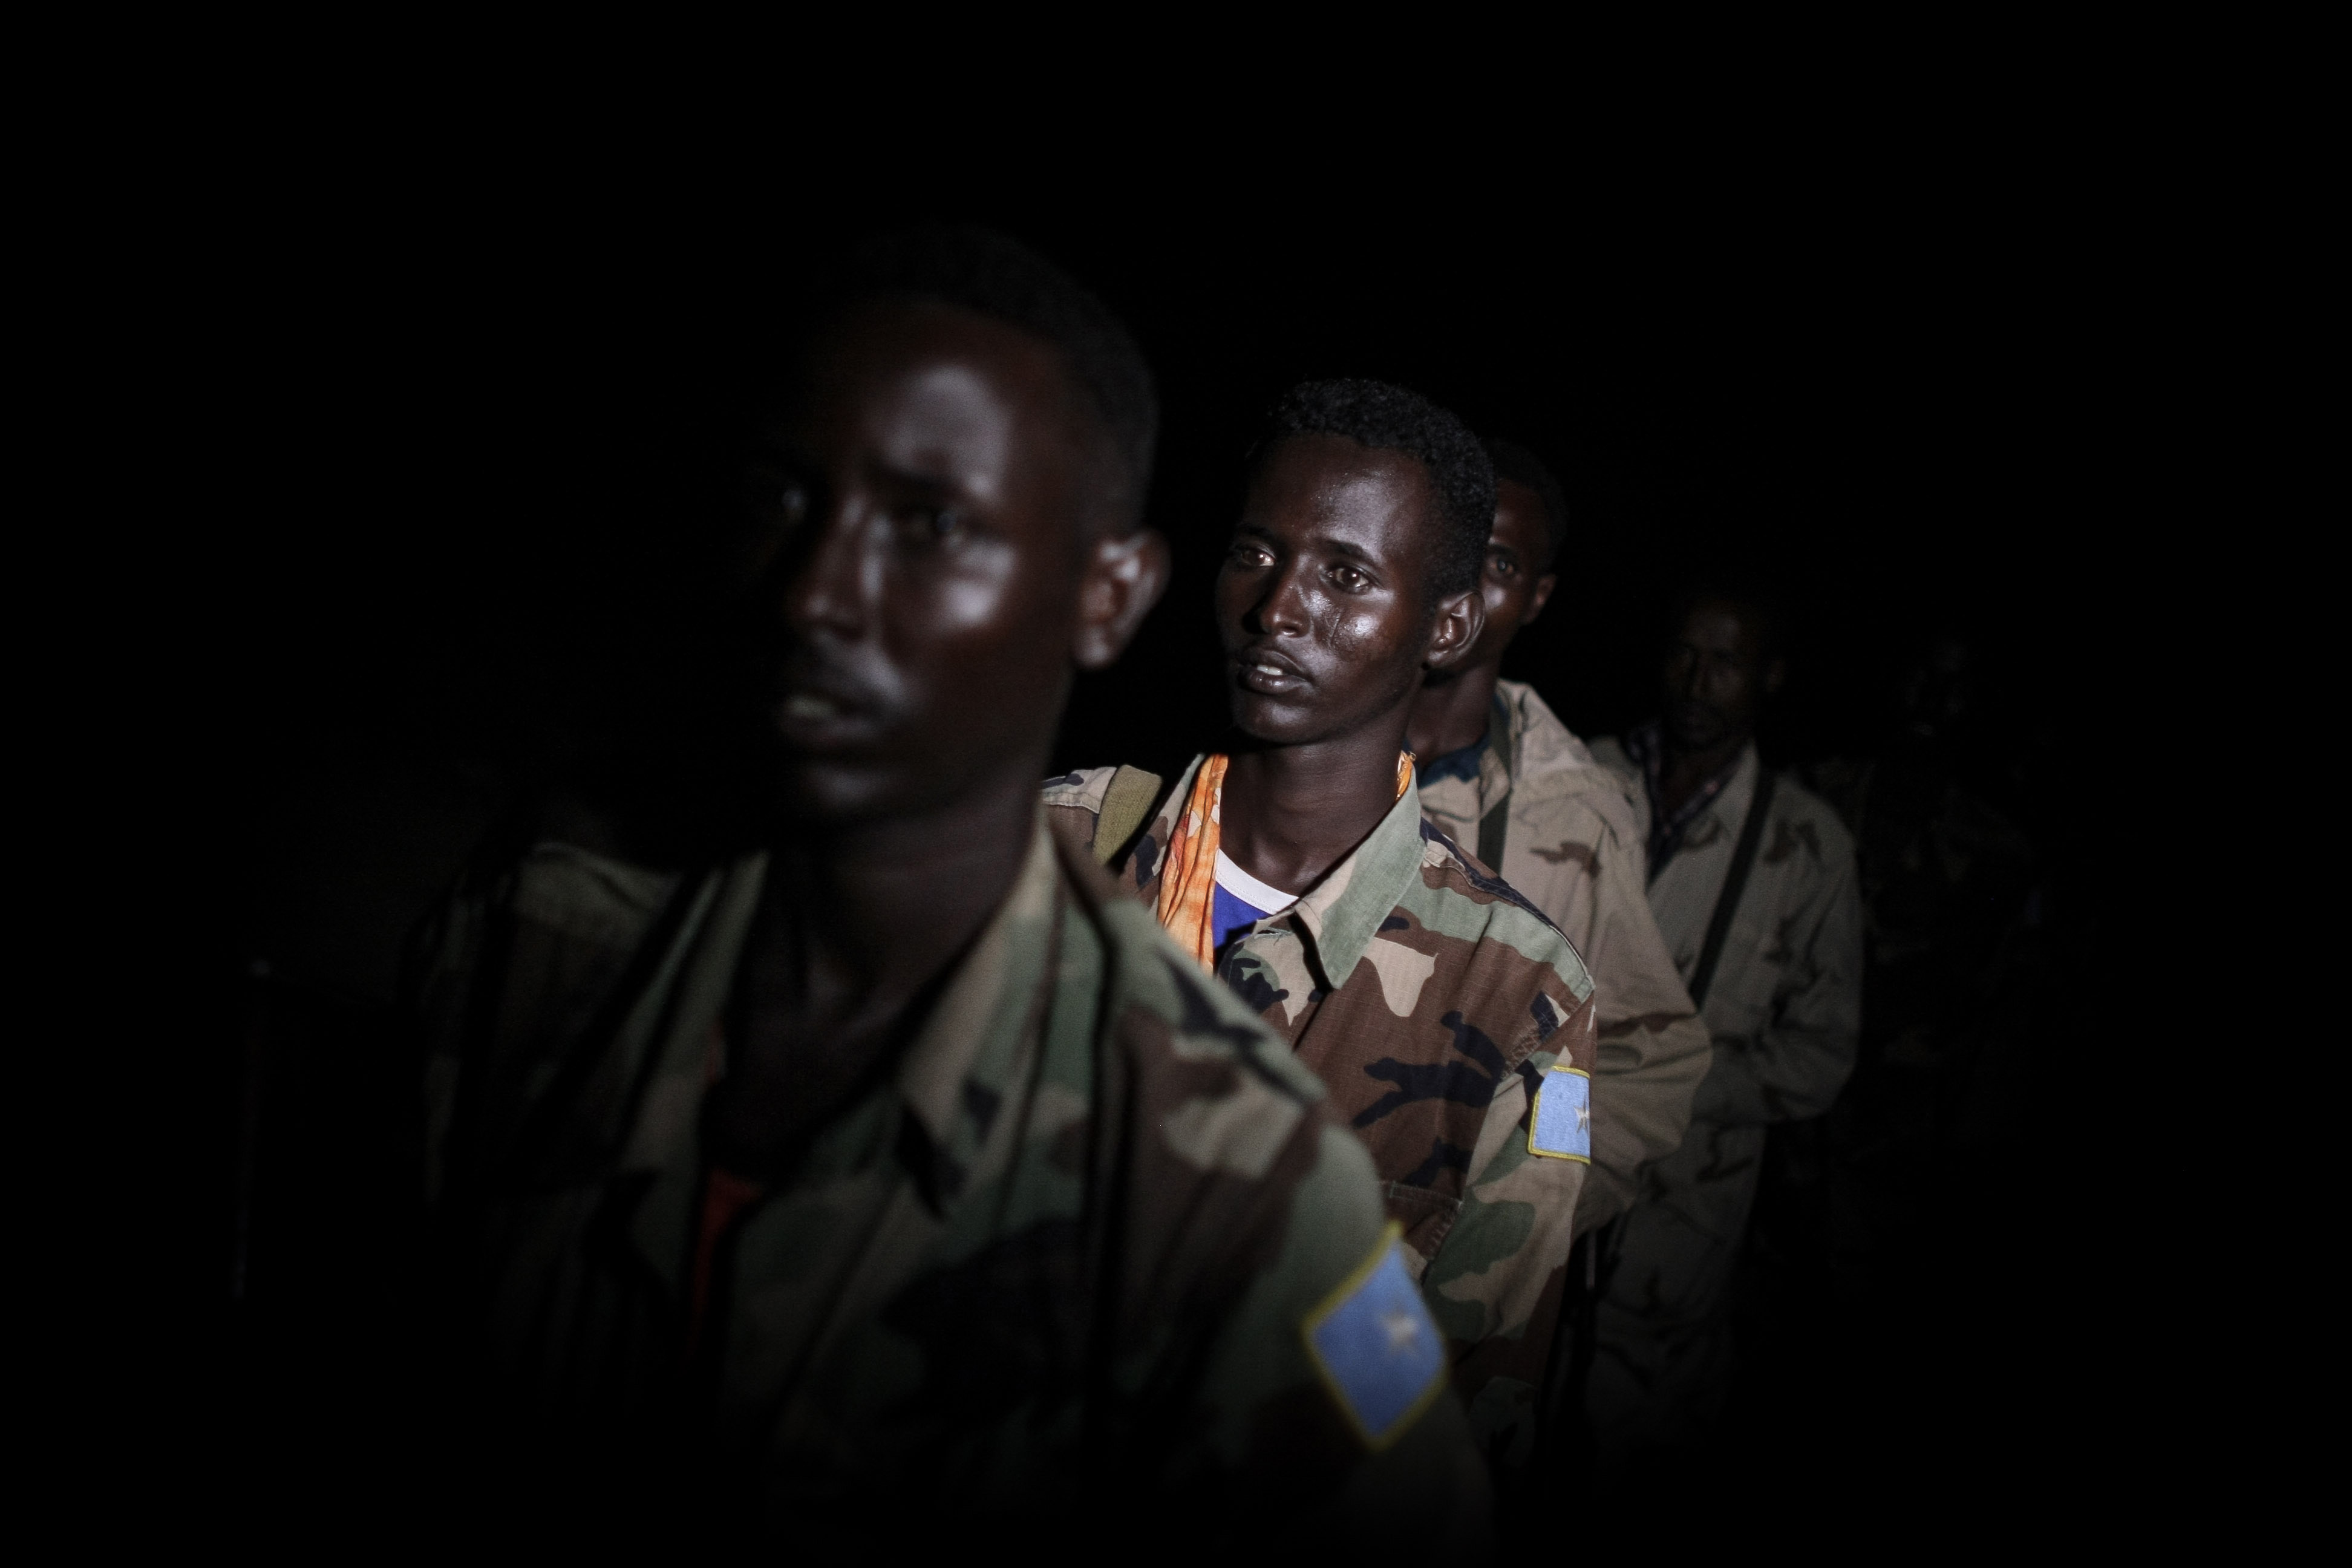 On night operations with the African Union Mission in Somalia 09, AMISOM, Army, Military, National, HQ Photo